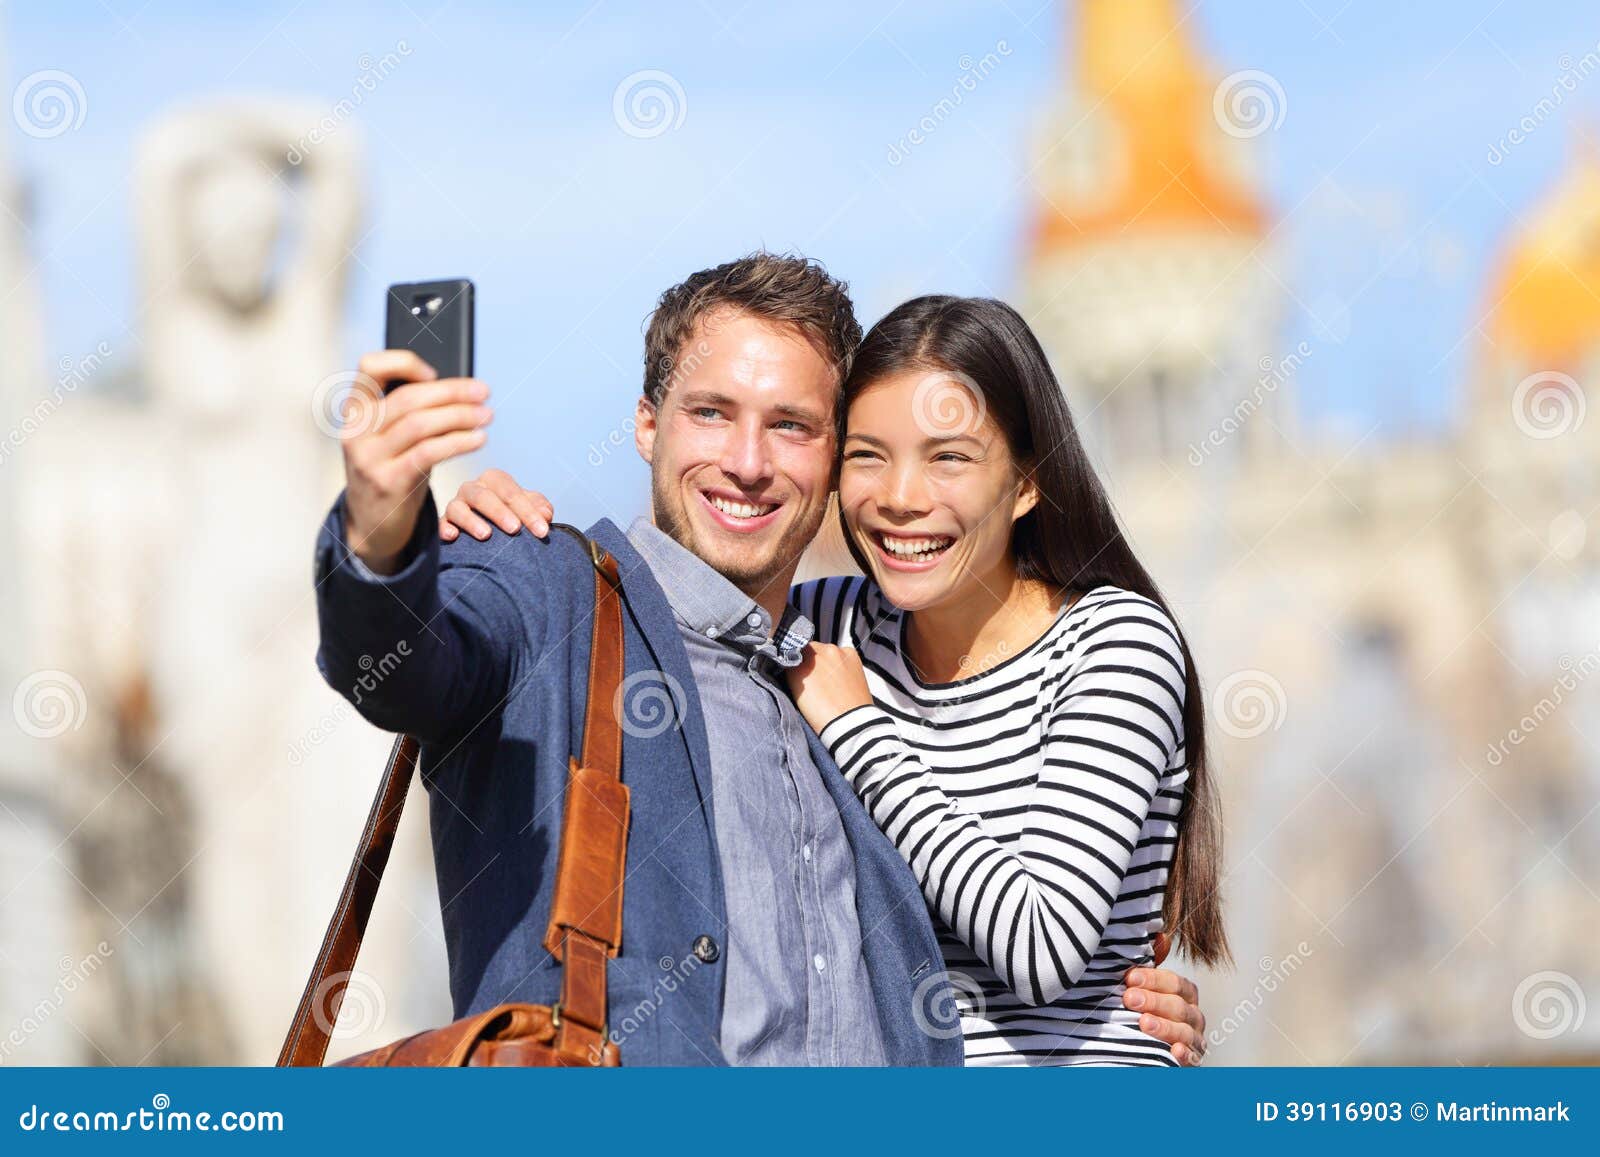 Phone Selfie Ocean And Couple Hug Bond And Enjoy Time Together For Peace  Freedom Or Romantic Date Sea Beach Memory Photo And Man Piggyback Woman On  Fun Travel Holiday In Rio De